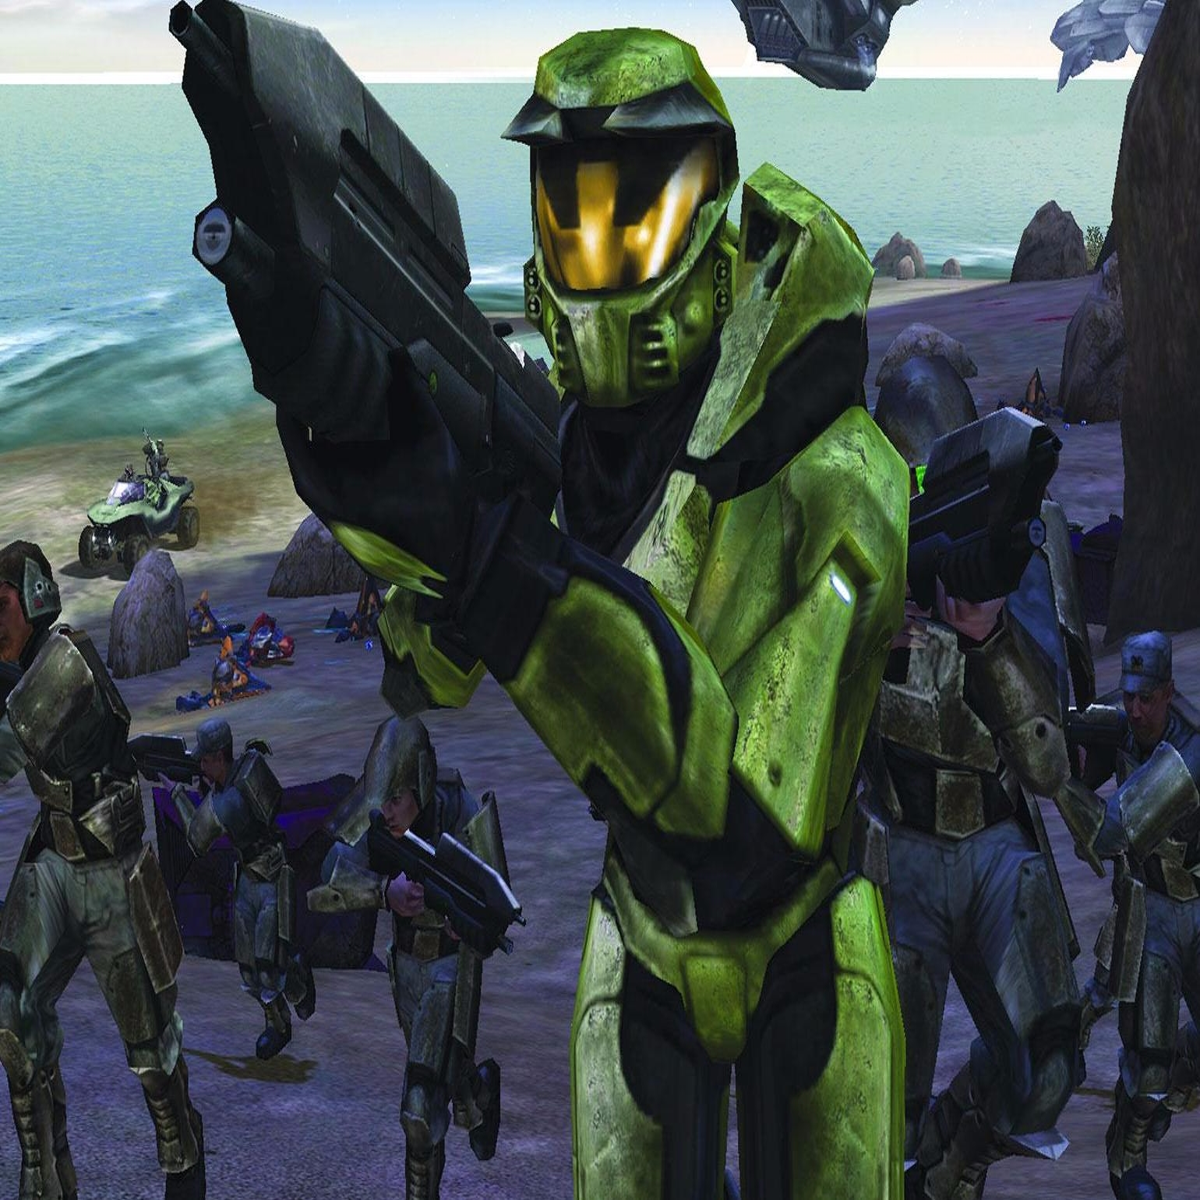 Halo: Combat Evolved gets surprise launch on PC - CNET